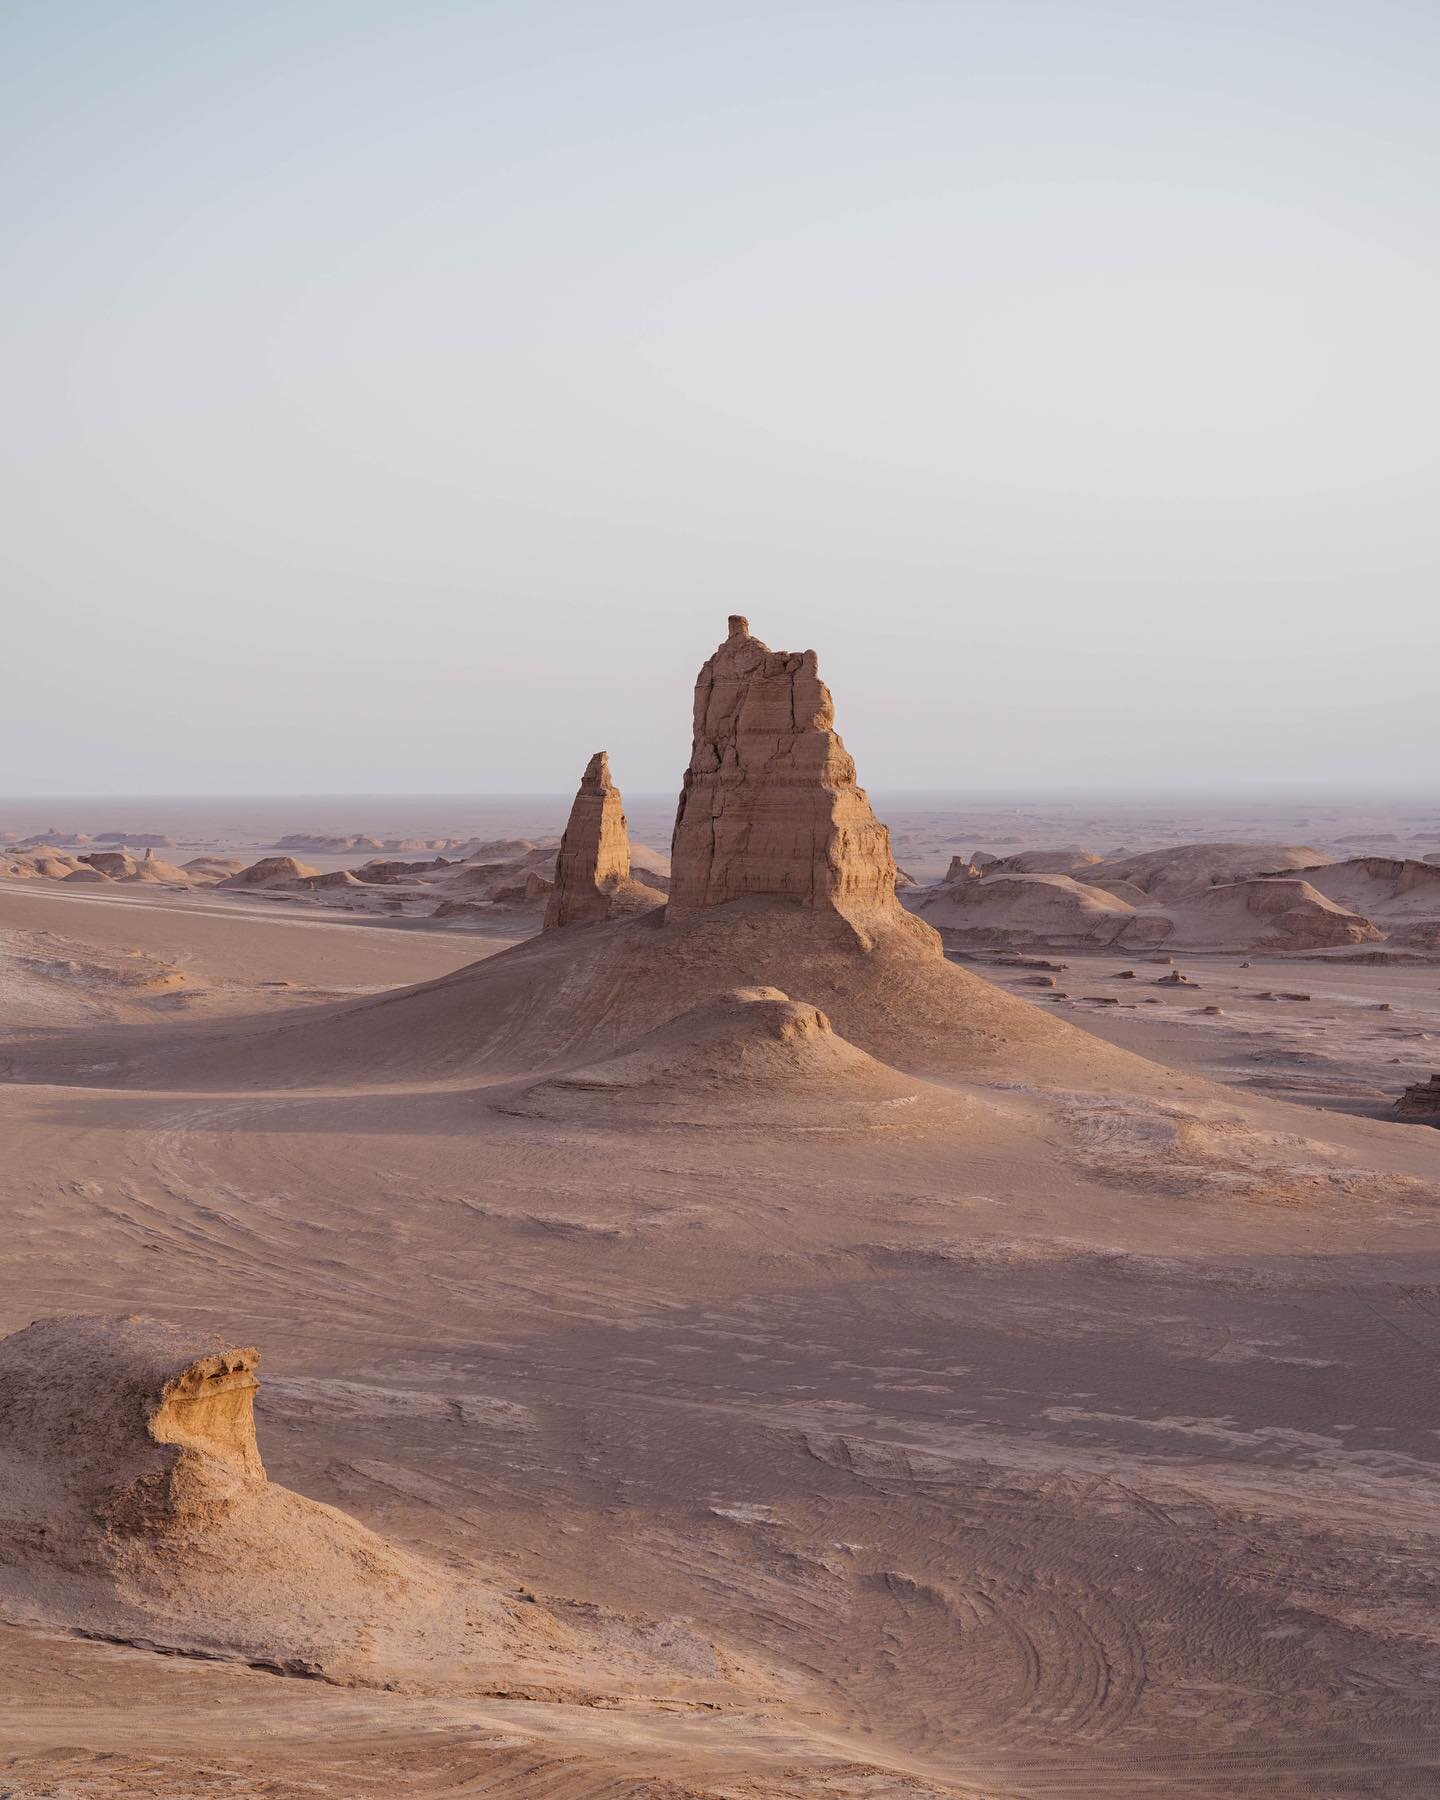 The Lut Desert in Iran, the hottest place on earth. One of three deserts I crossed on my Silk Road journey in 2019. I&rsquo;ll be giving a talk about this journey next Wednesday. For details, click the link in my bio. I hope you can join!
&mdash;&mda